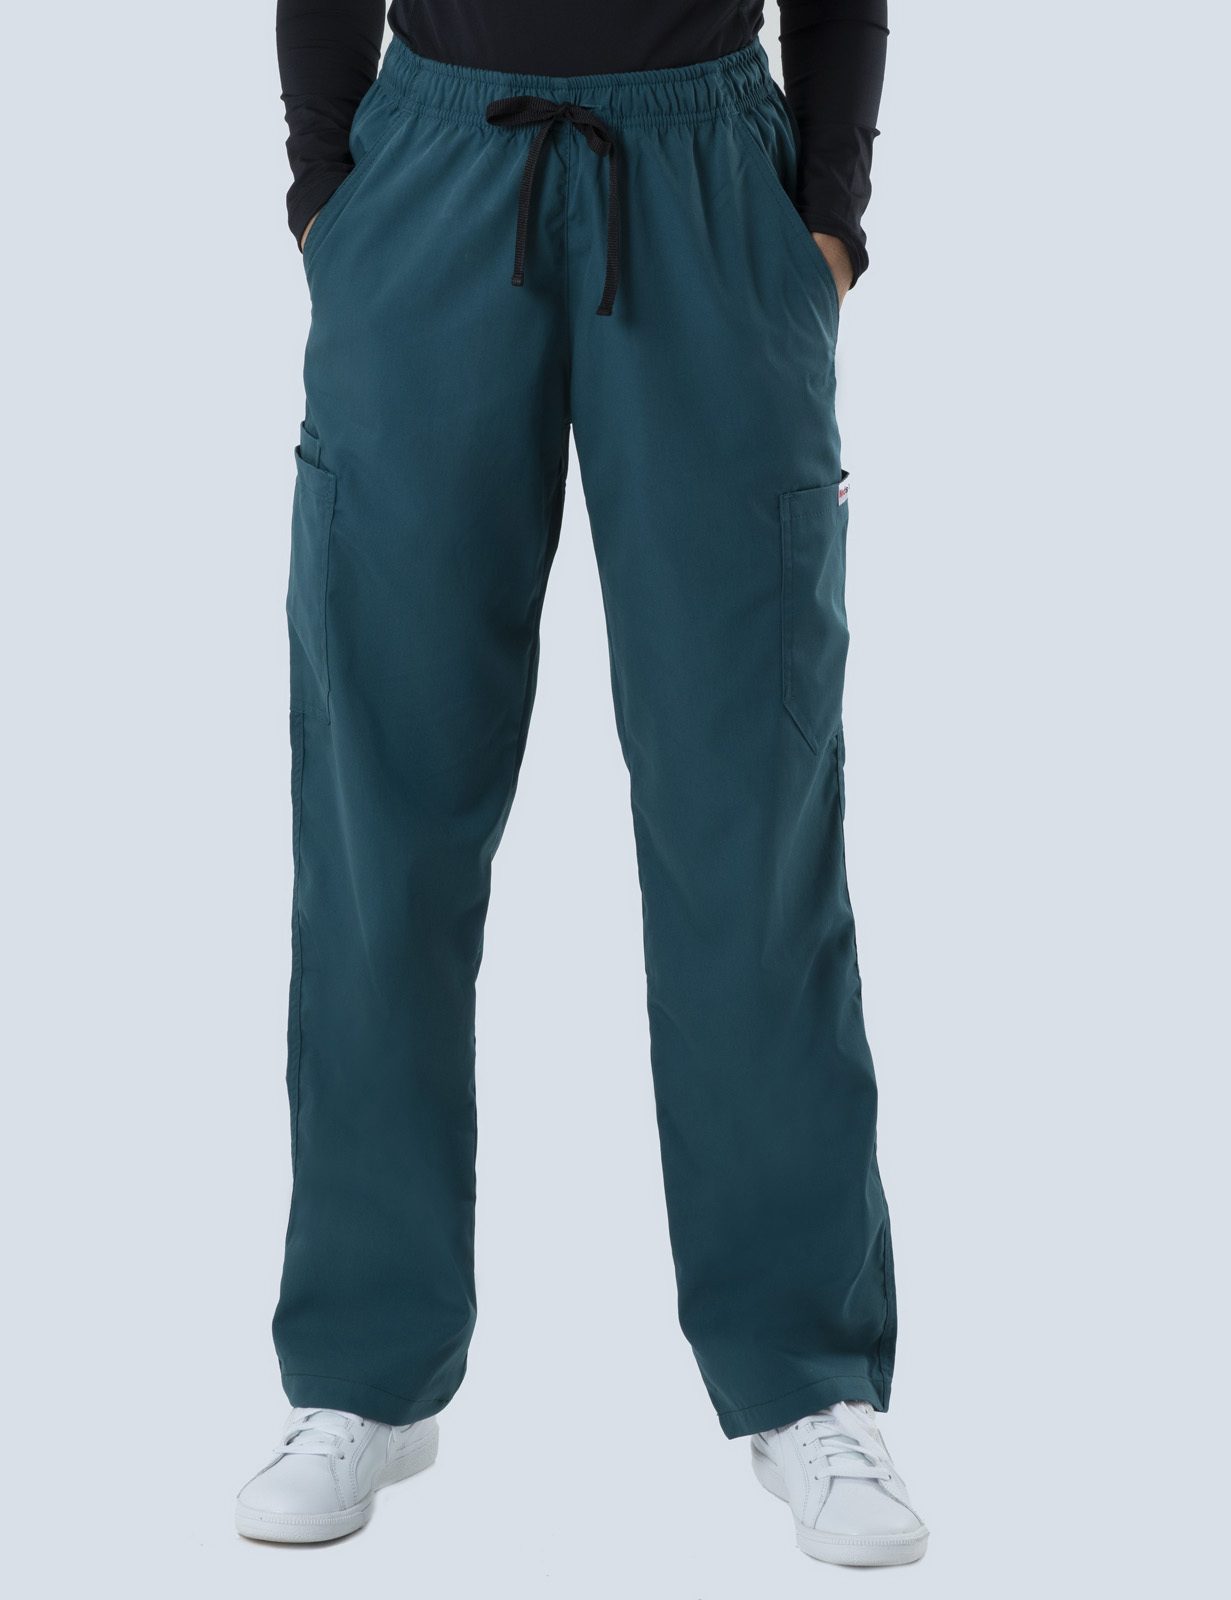 Canberra Hospital - Physiotherapy Admin (4 Pocket top and Cargo Pants in Caribbean incl Logos)